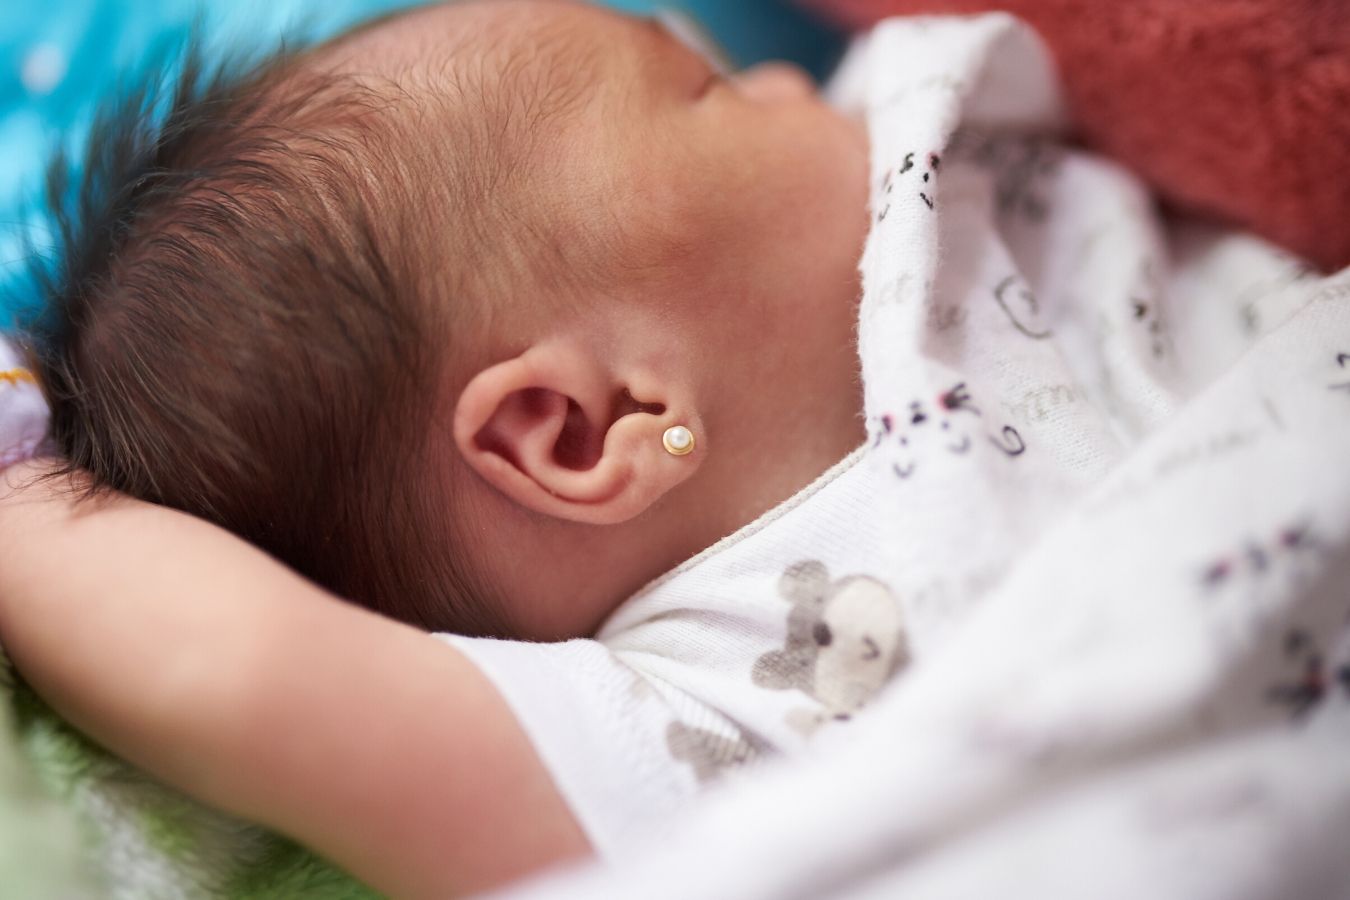 Is Piercing Your Baby's Ears A Cultural Choice, A Gendered Choice, Or Both?